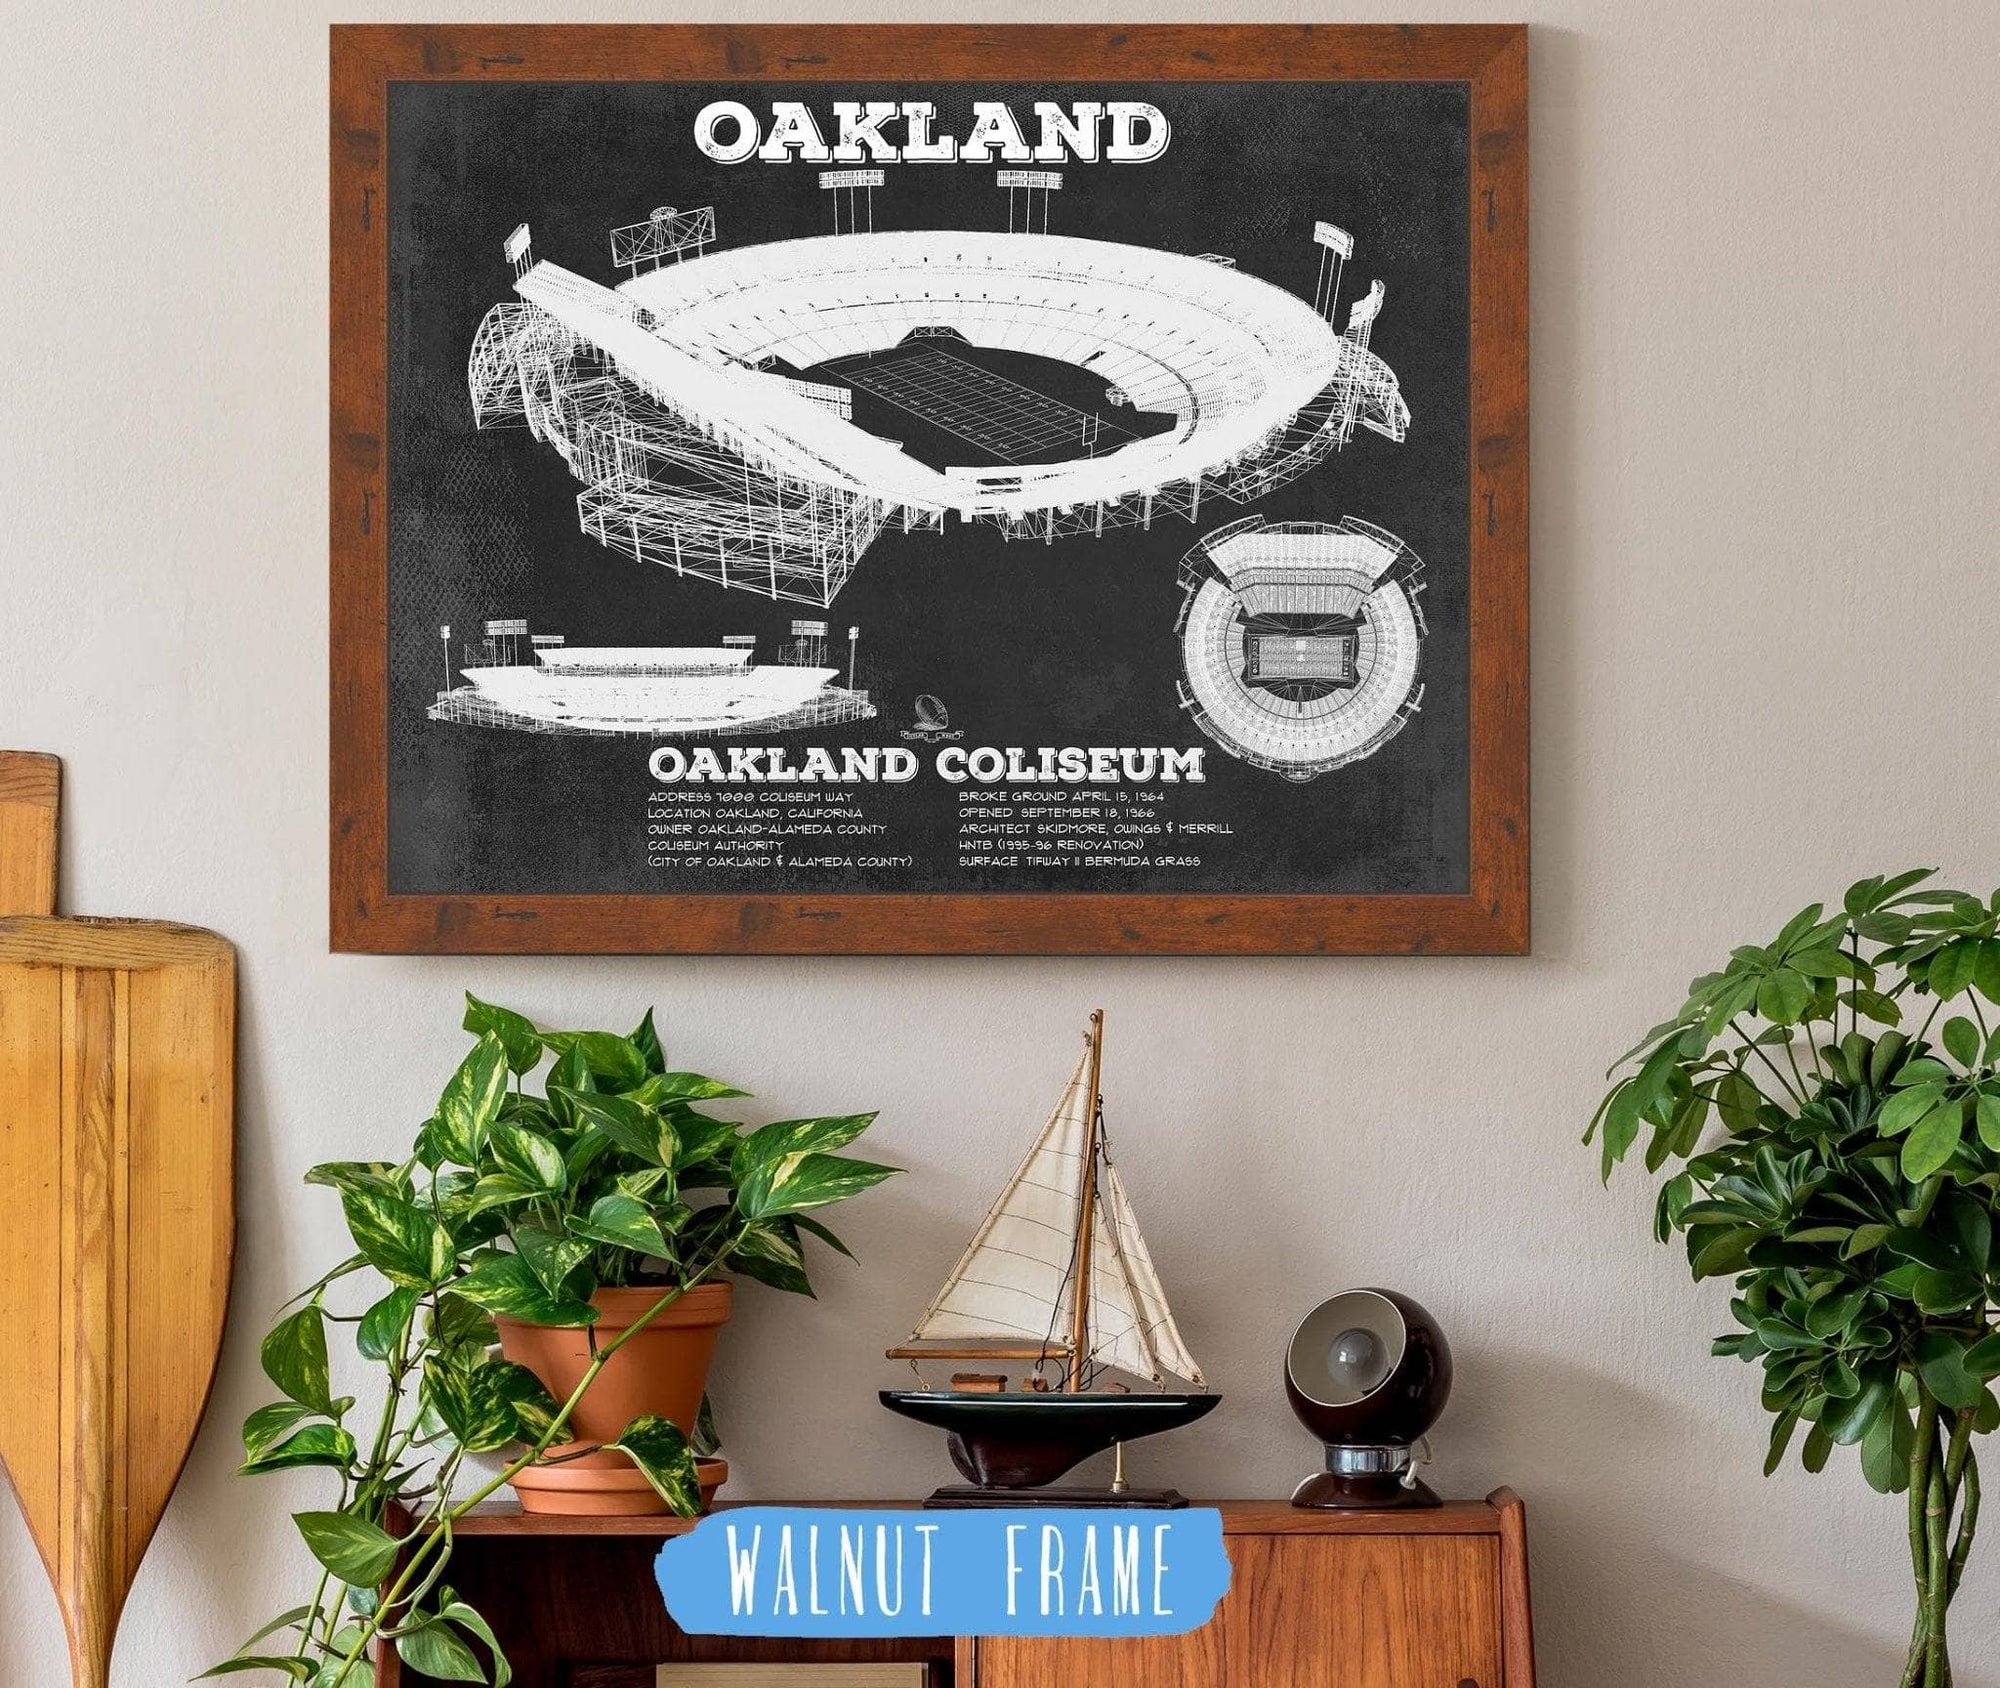 Cutler West Pro Football Collection 14" x 11" / Walnut Frame Oakland Raiders Team Color Alameda County Coliseum Seating Chart - Vintage Football Print 920787395-TOP_70496